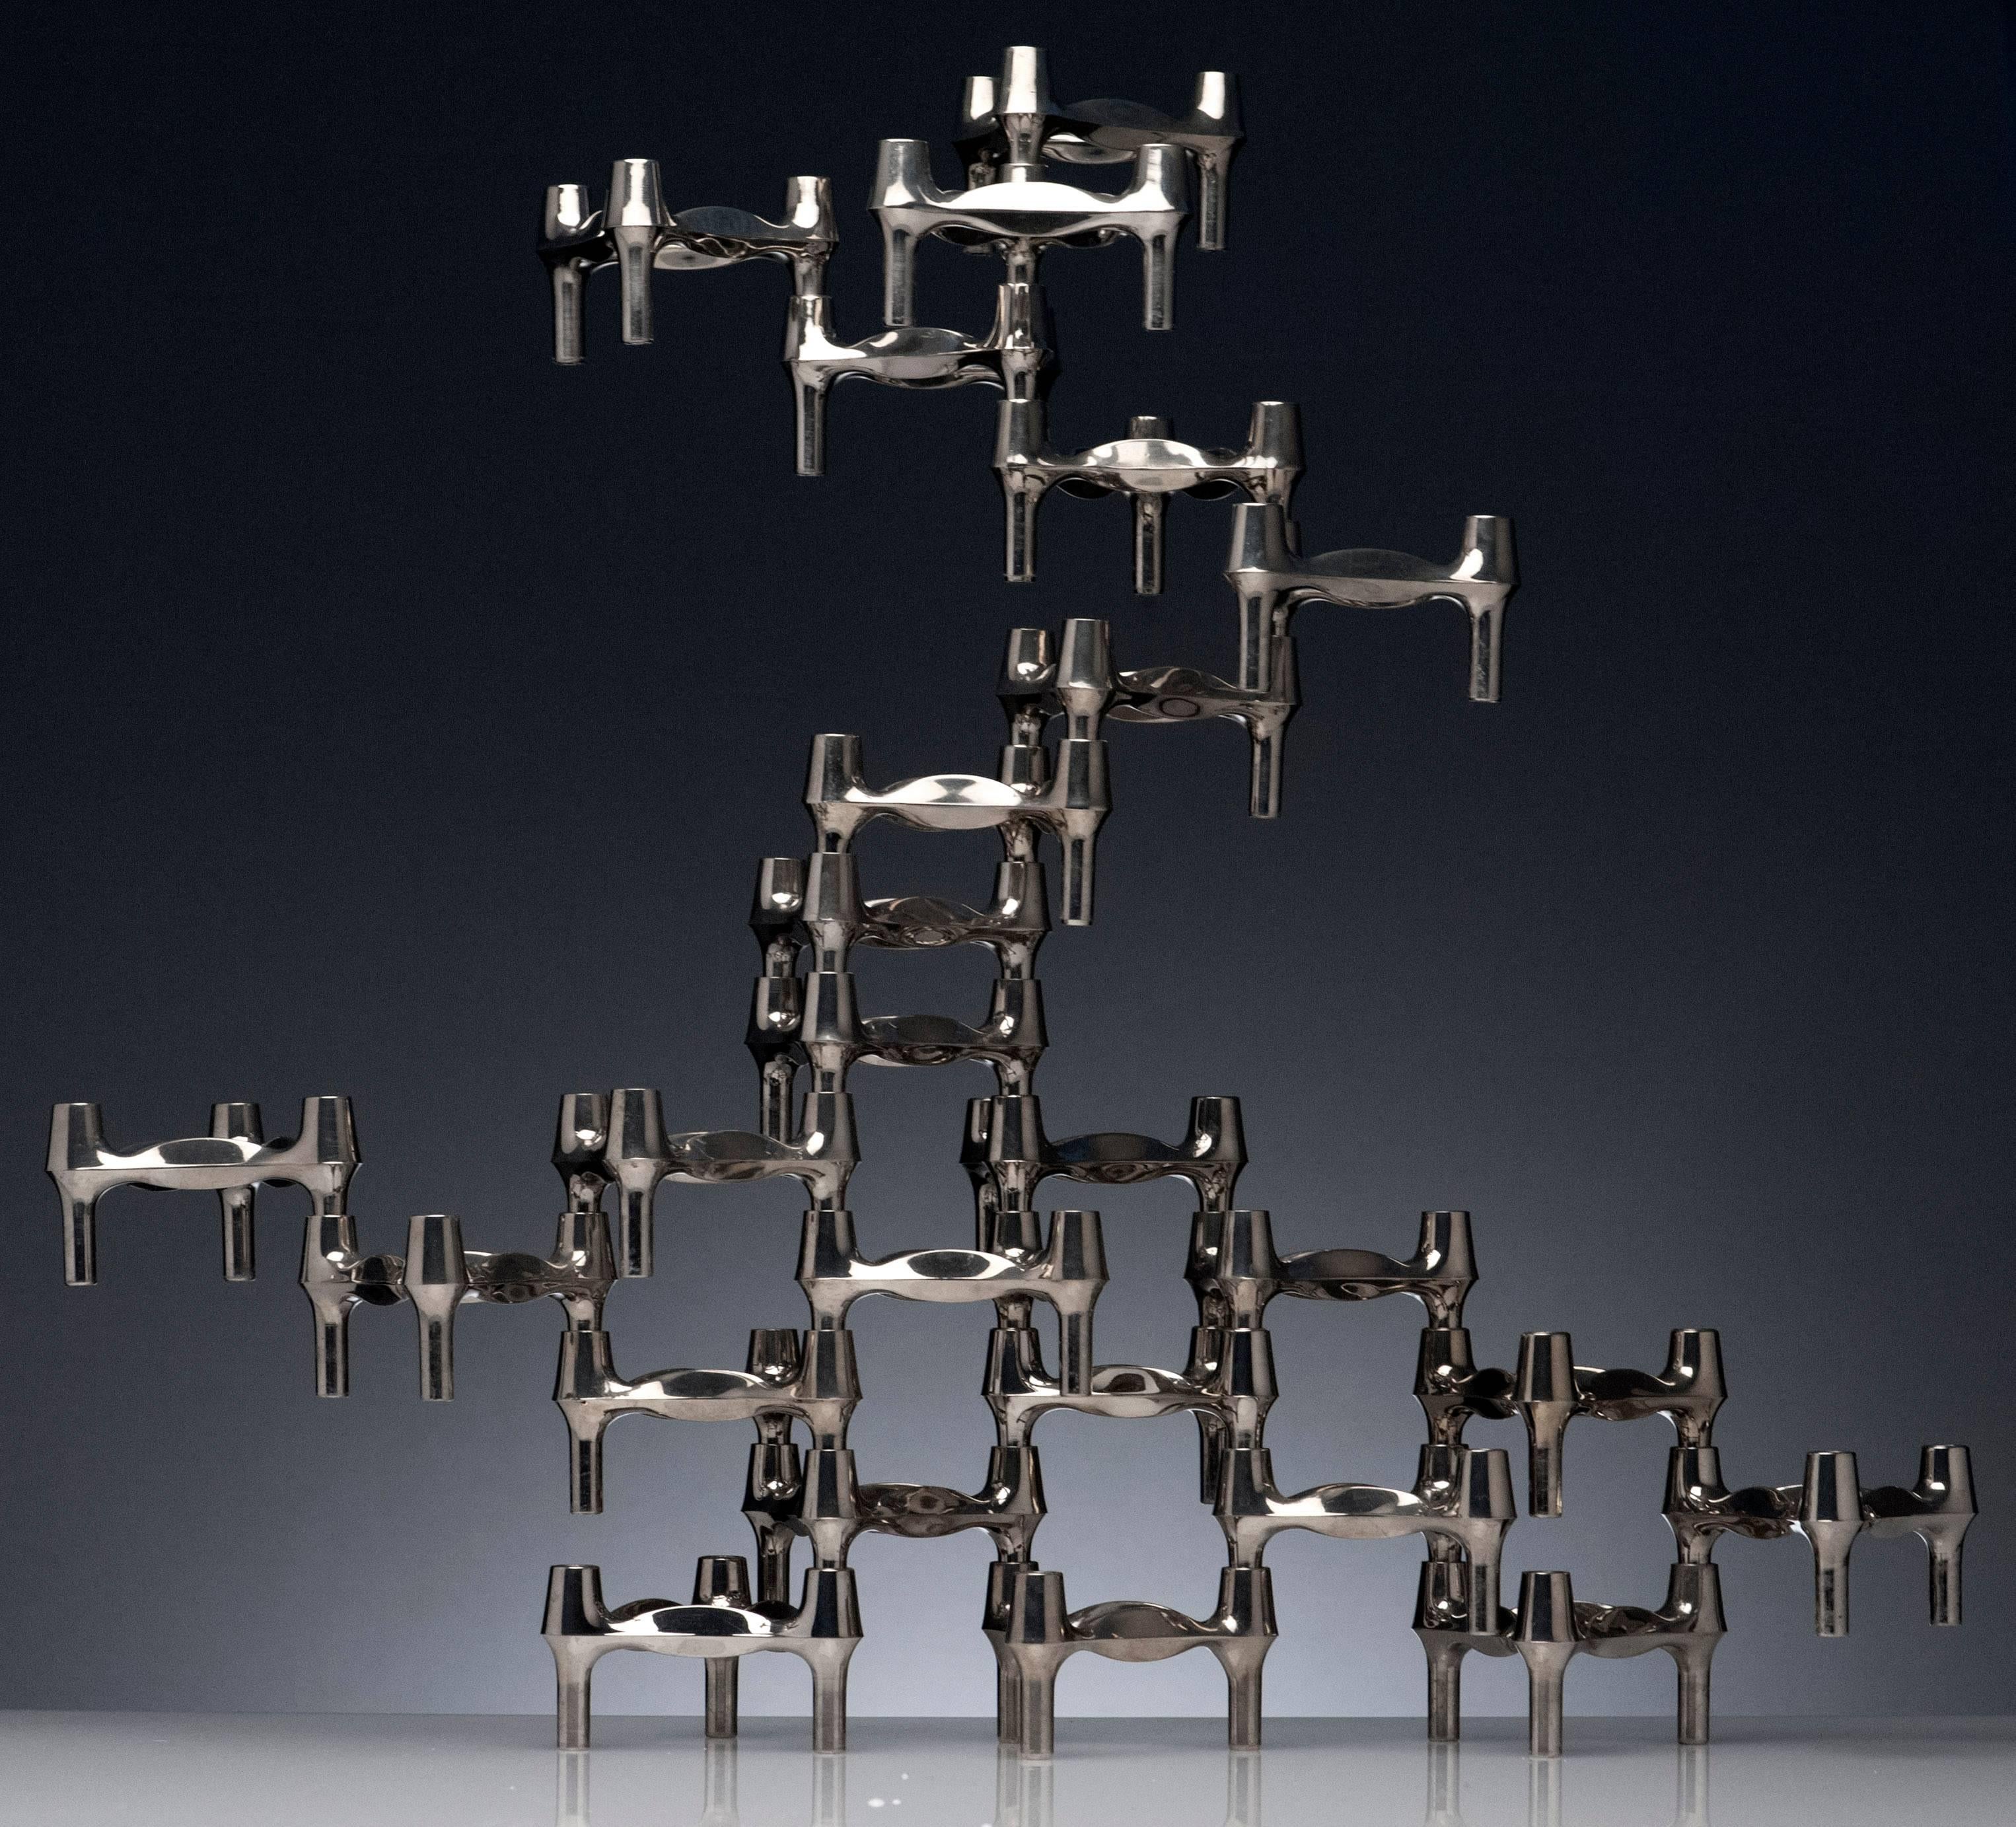 25 Nagel candleholders manufactured by BMF of Germany. Clever inter-locking and stacking design allows for endless configurations. The sculptural quality makes it a great centrepiece. Quality made of solid chromed nickel. Condition is excellent.